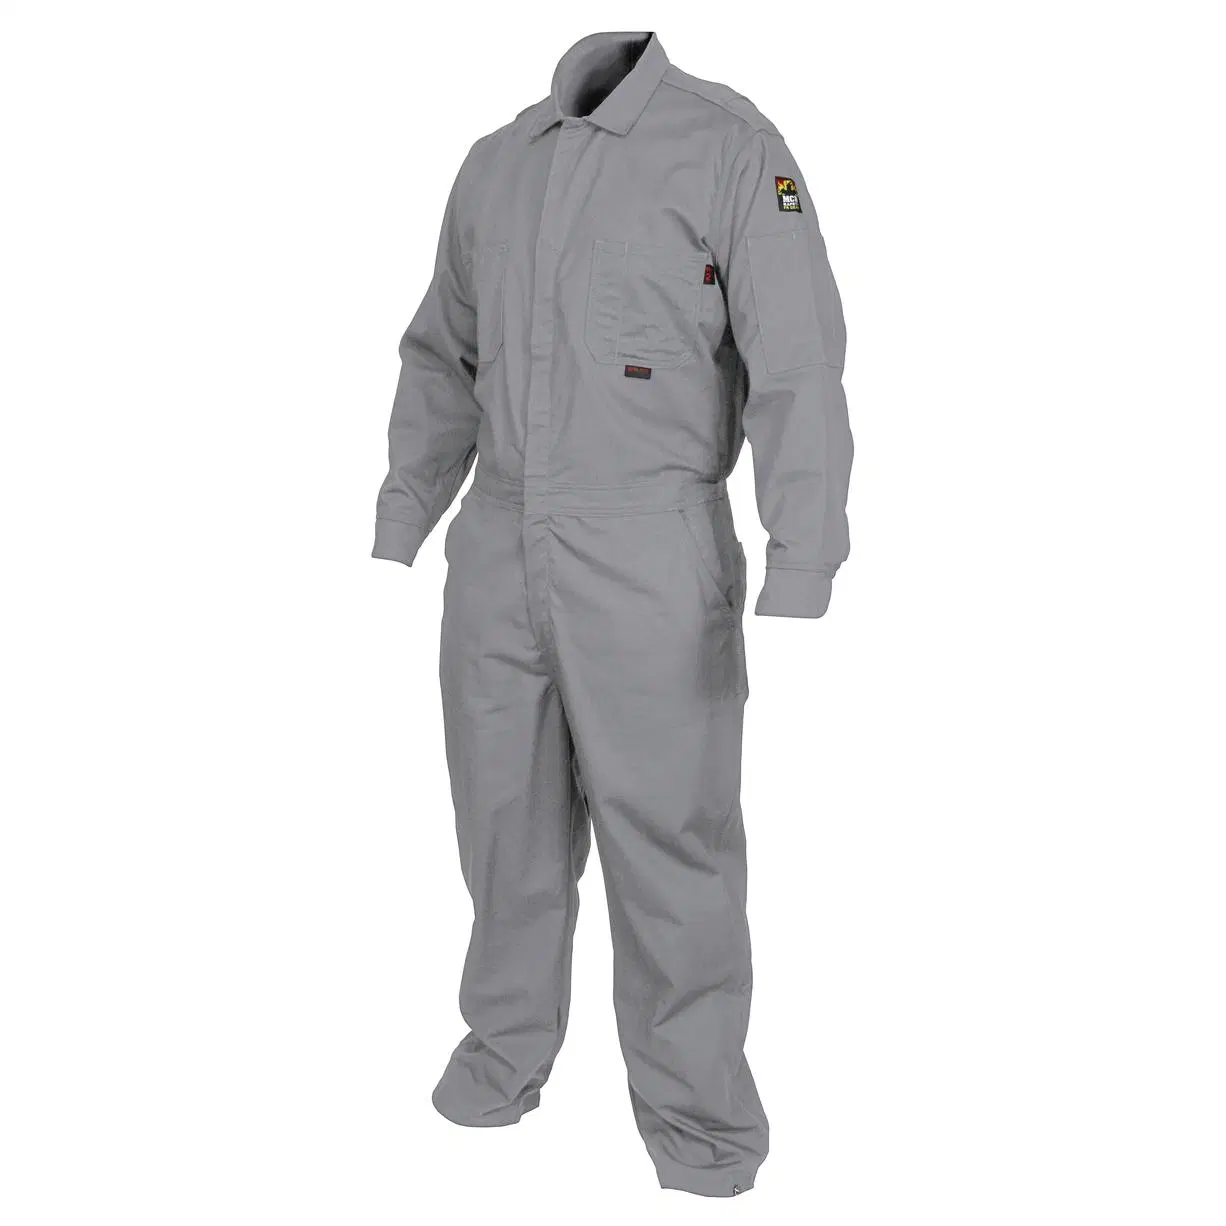 Anti-Static Flame Resistant Workwear - Tailored for Electronics Manufacturing